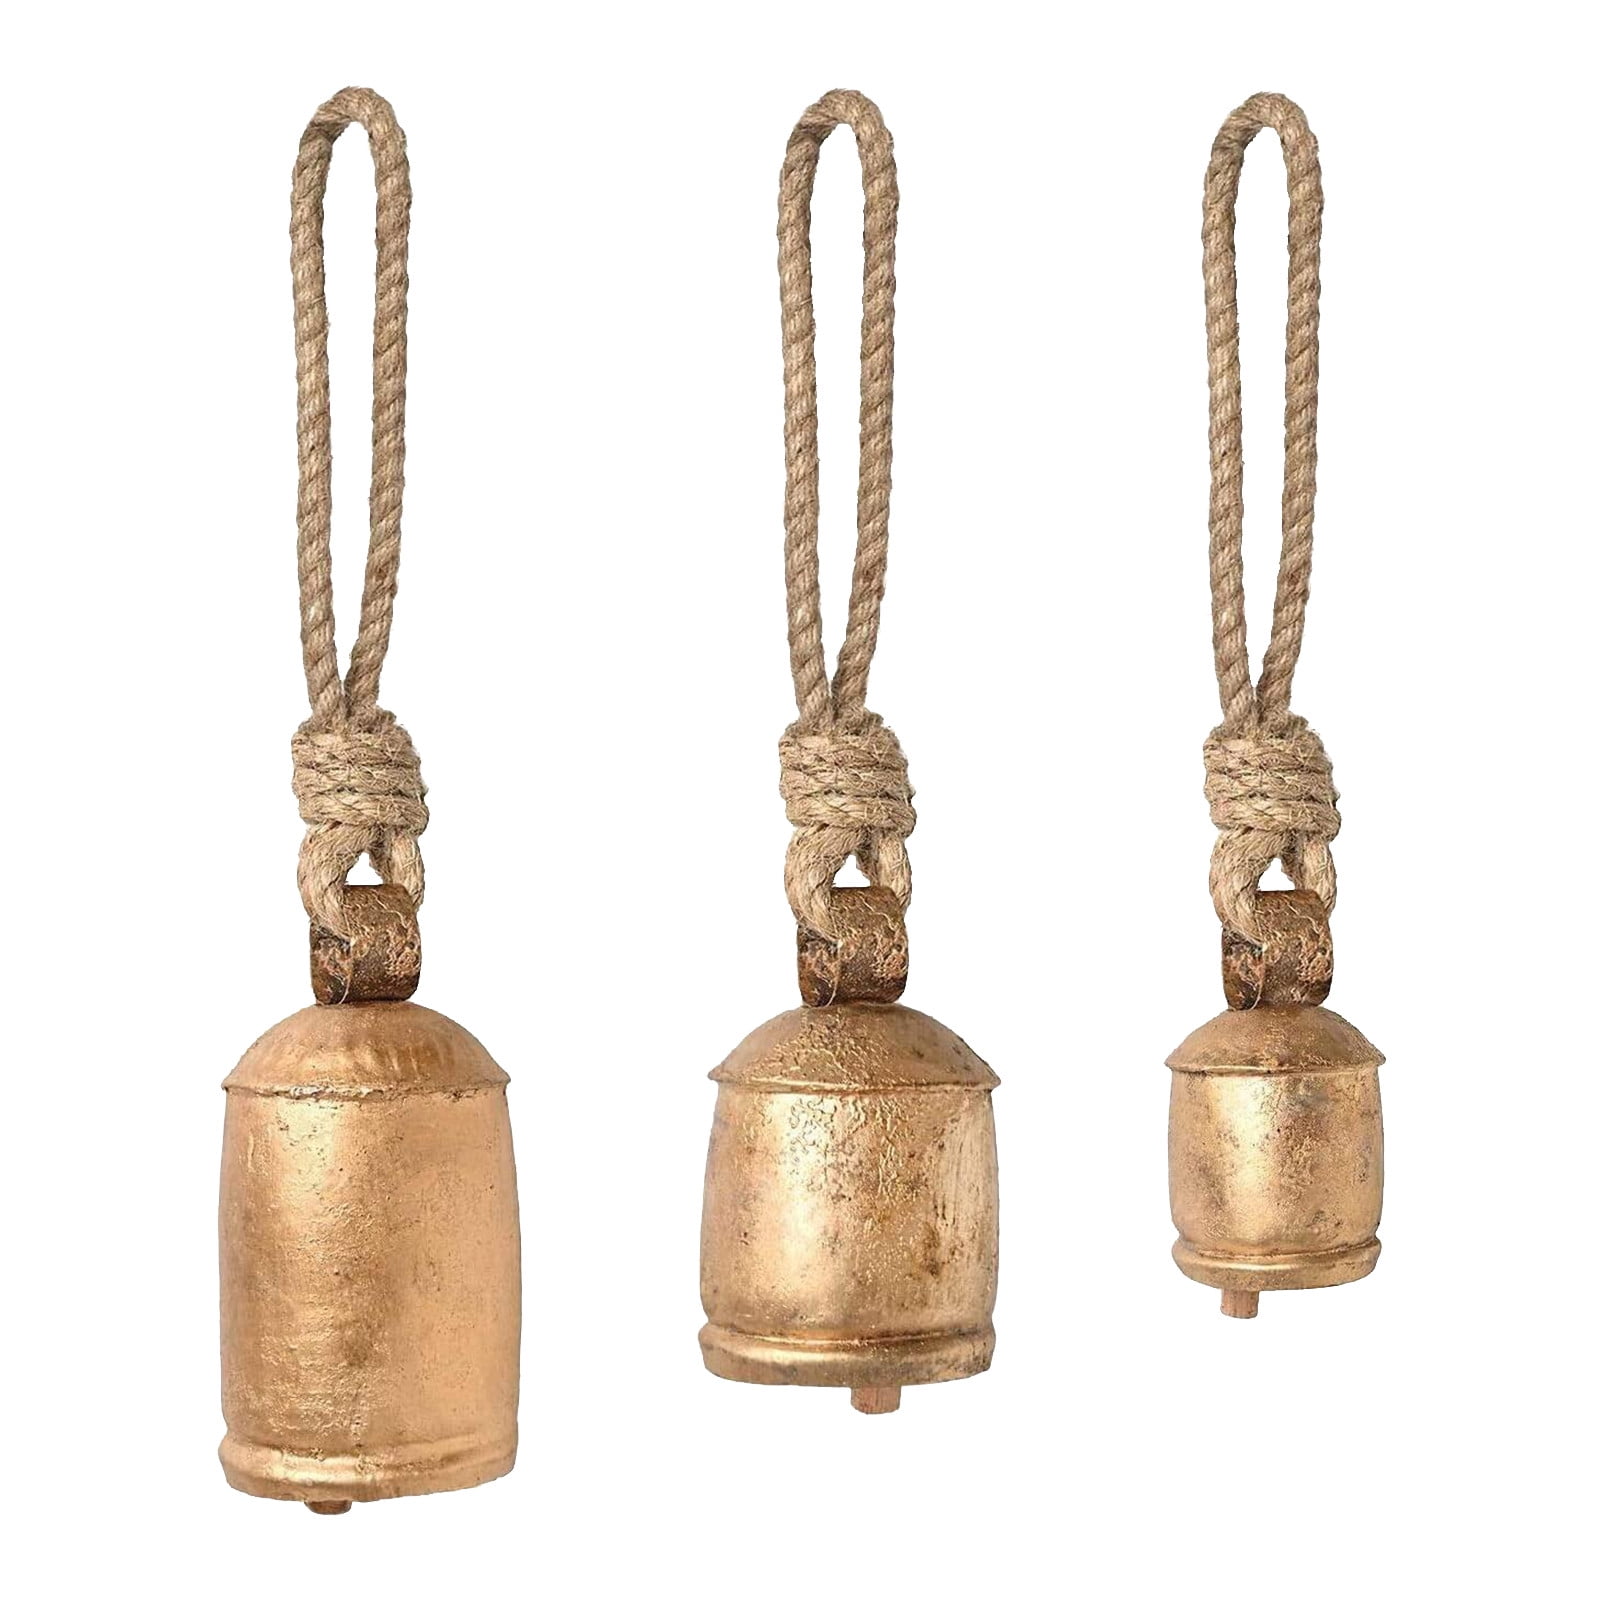 Rustic Cow Bells on Rope Set of 3 - 3, 4, 5 Tall - Paykoc Imports, Inc.